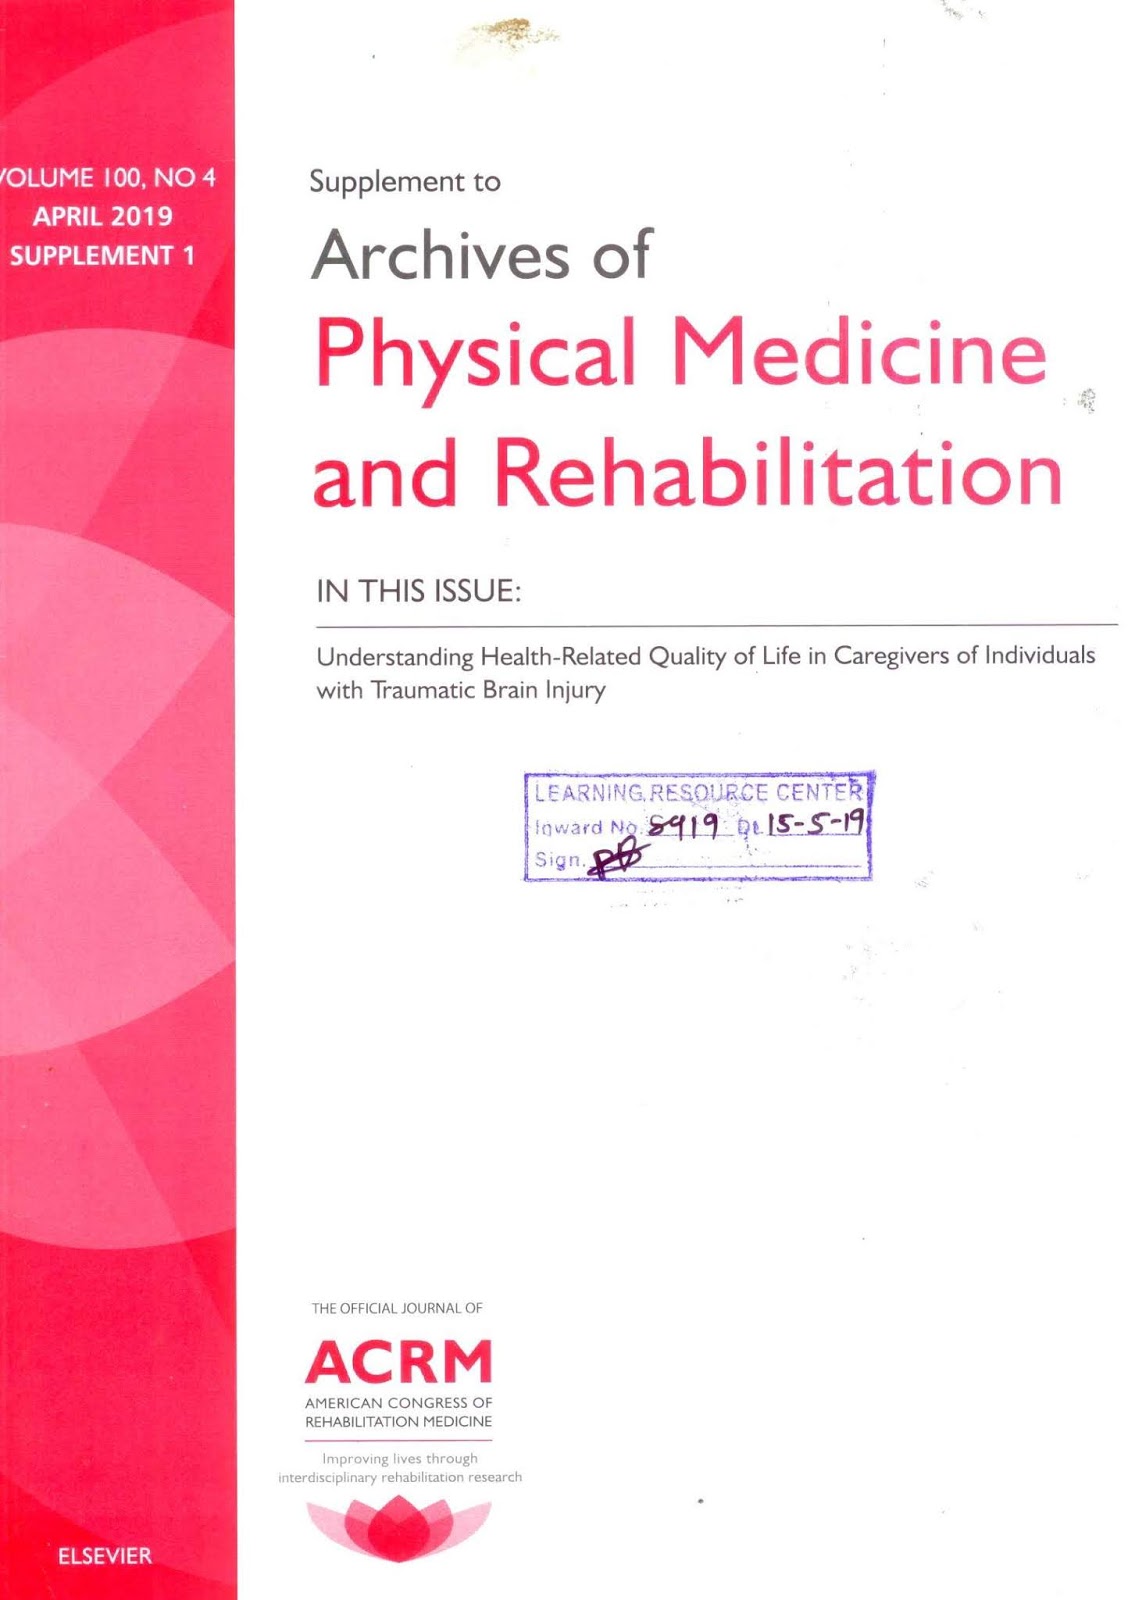 https://www.sciencedirect.com/journal/archives-of-physical-medicine-and-rehabilitation/vol/100/issue/4/suppl/S